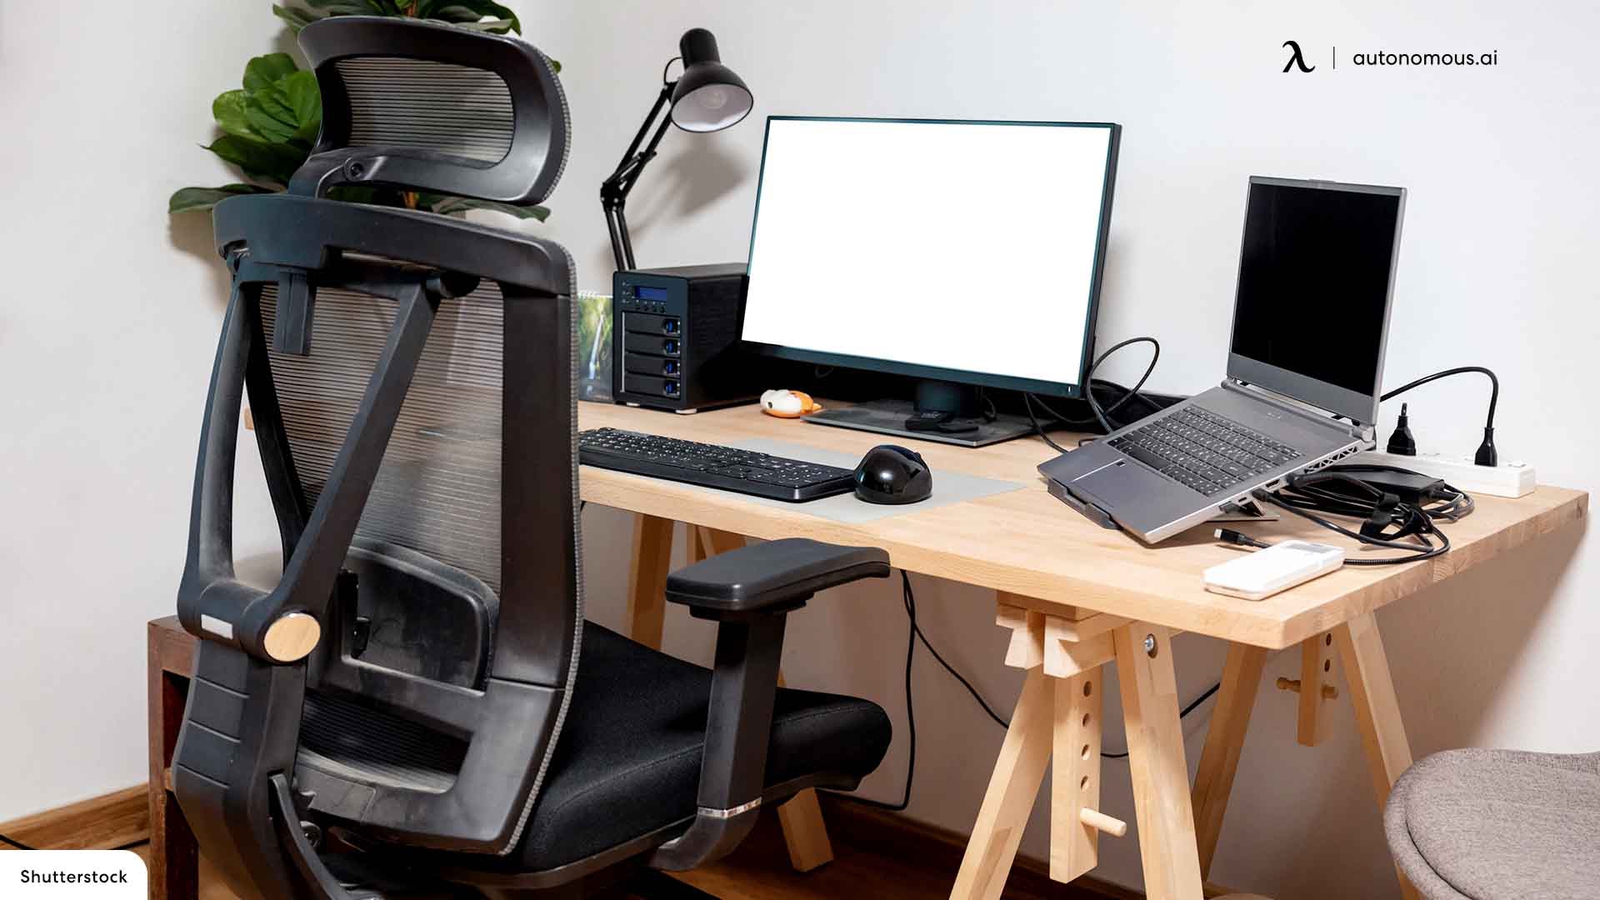 15 Fully Adjustable Desk Chairs for Ergonomic Workplace